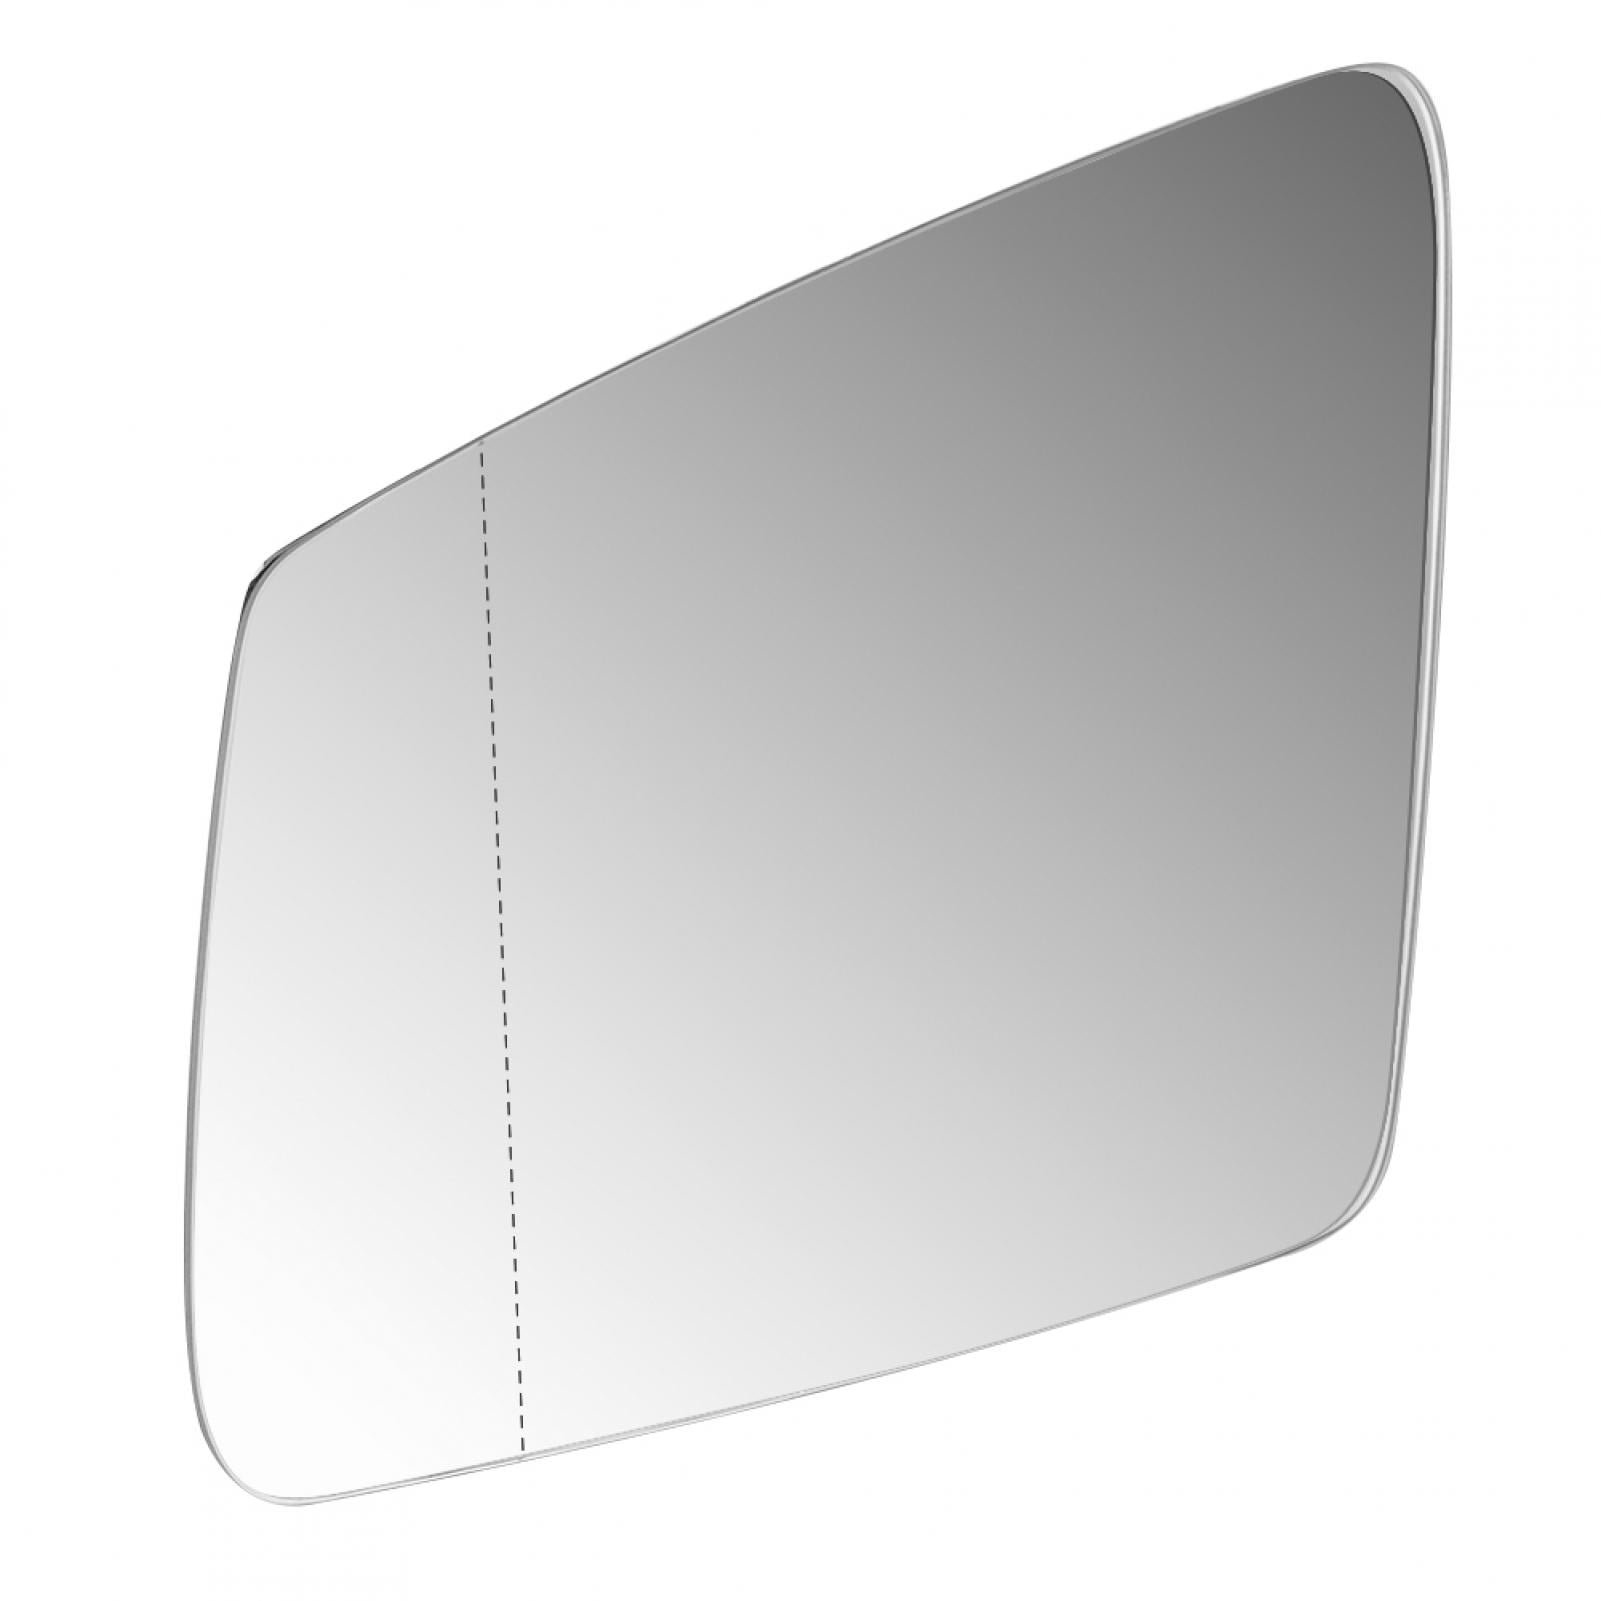 Right Driver Side Wing Door Mirror Glass for Toyota Land Cruiser 2009-2015